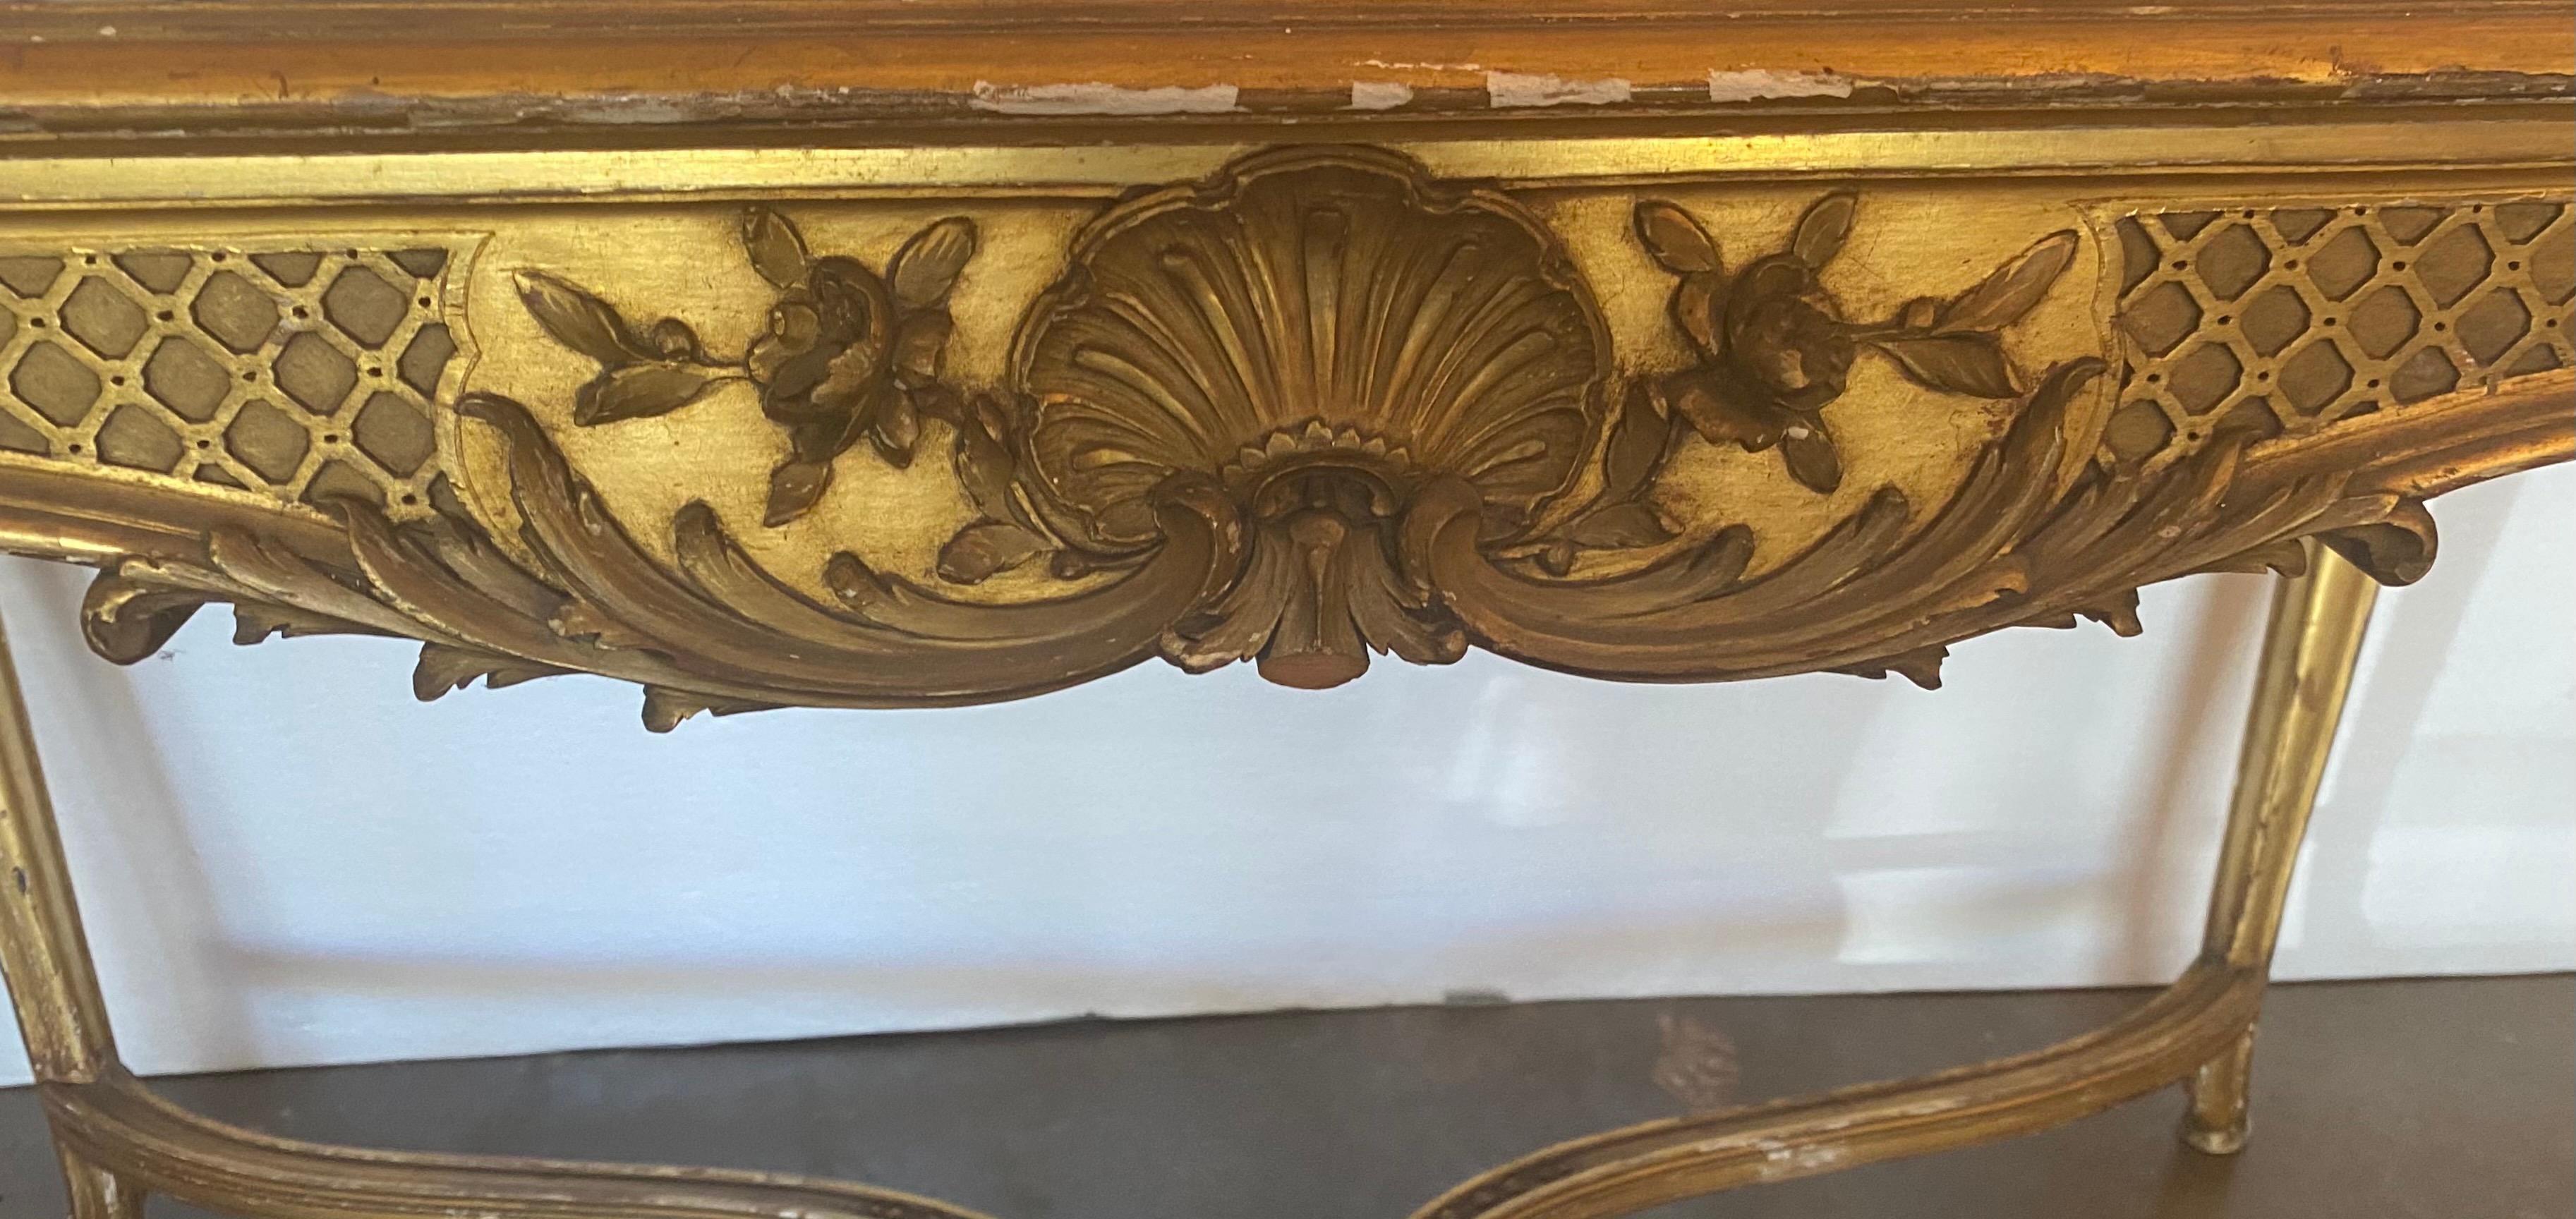 Exceptional Louis XV style marble-top gilt table, mid 19th c., having shaped inset marble top, over carved apron with foliate and shell motifs, rising on cabriole legs, joined by X-stretcher, marble top intact with hairline and restoration.